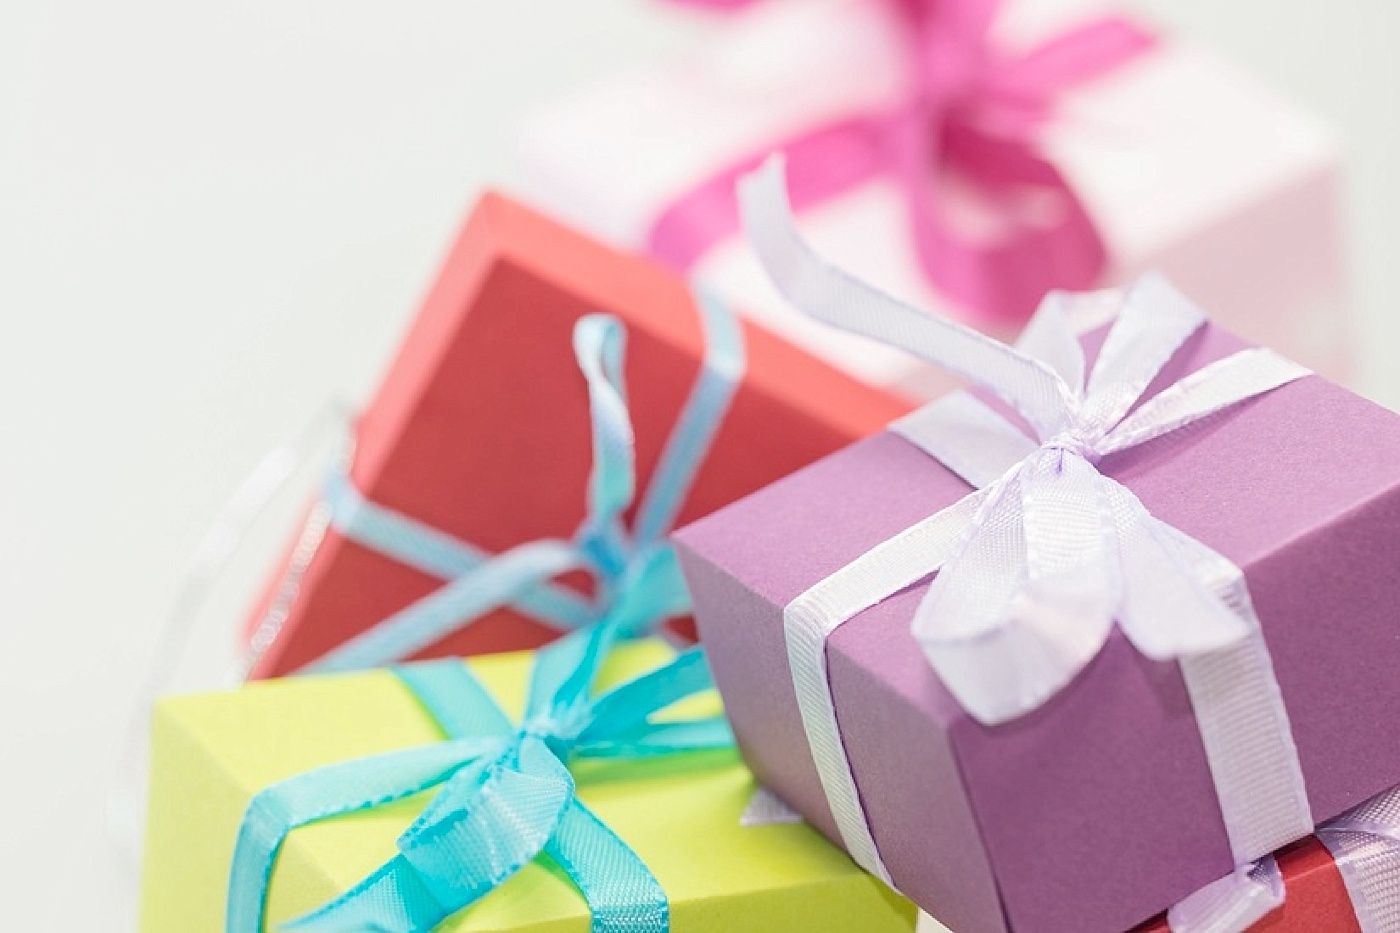 3 Ways to Give Back with your Business this Holiday Season | via the Rising Tide Society